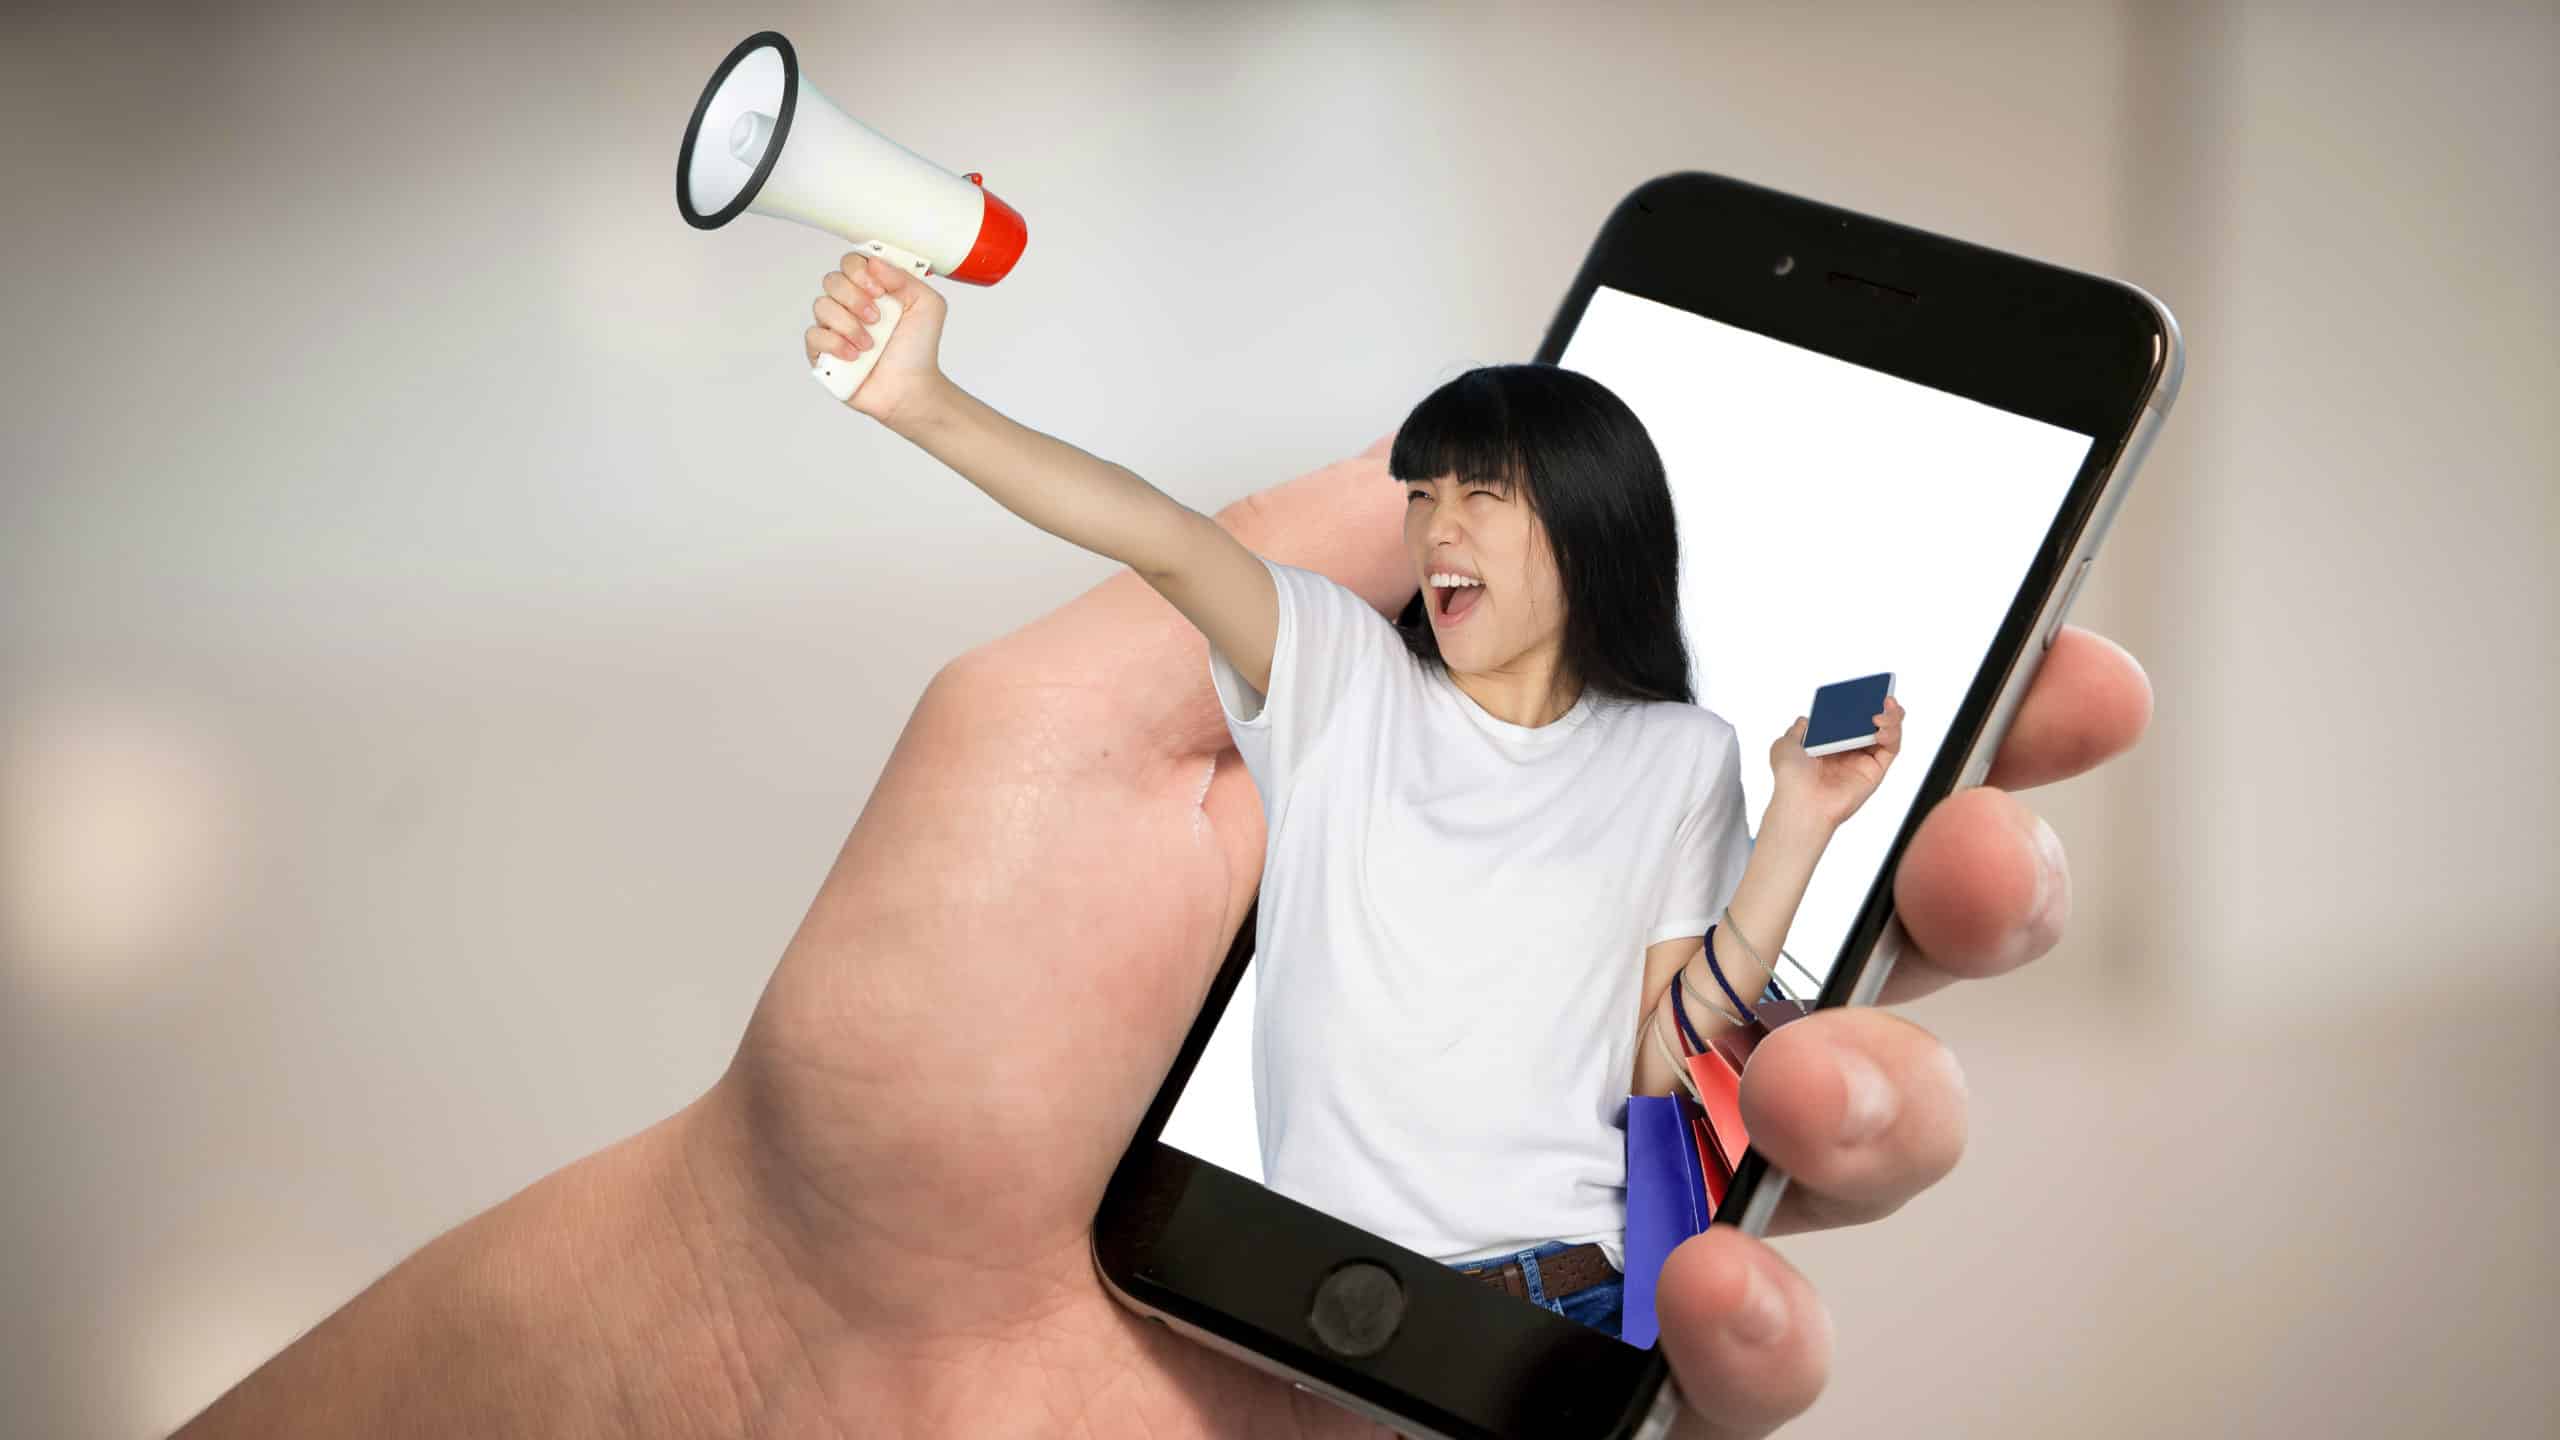 A person holds a phone with an influencer holding a microphone leaping out of the phone representing using sponsored content.